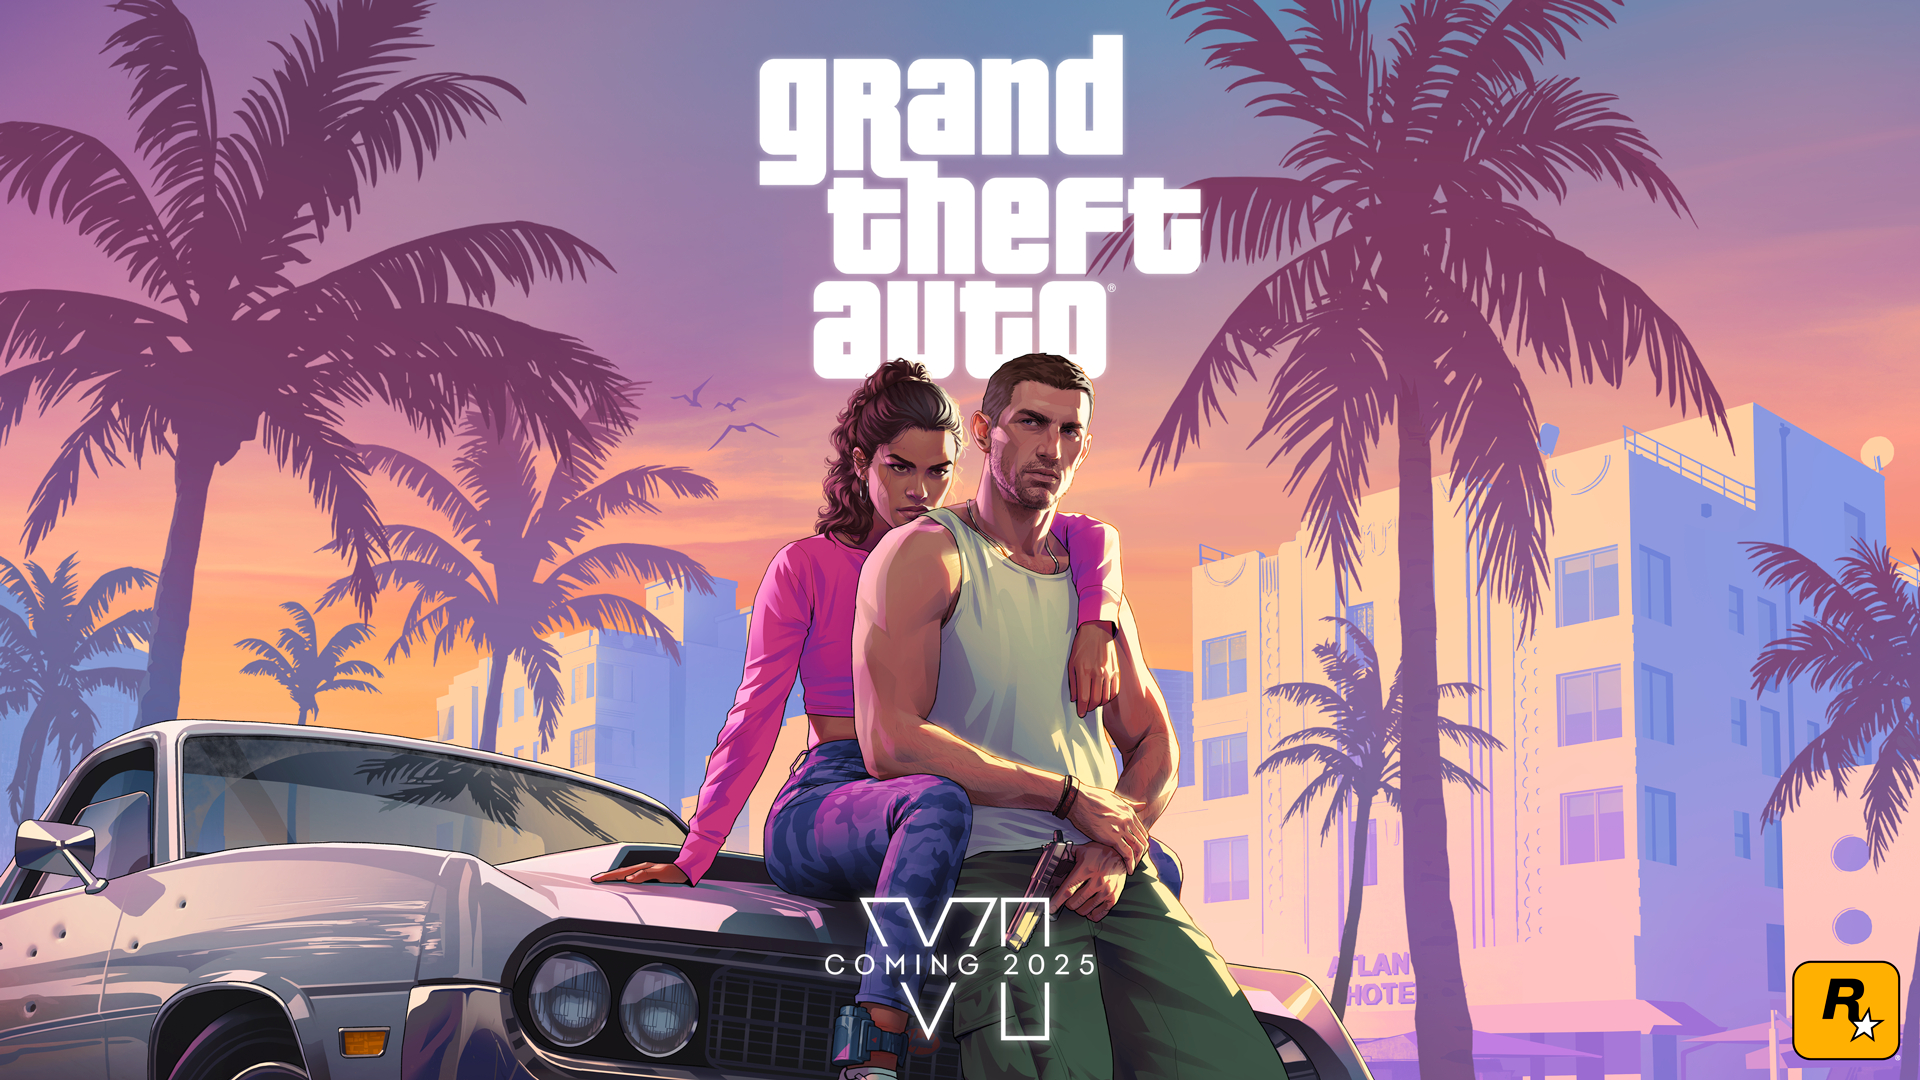 Grand Theft Auto 6 officially revealed with first trailer